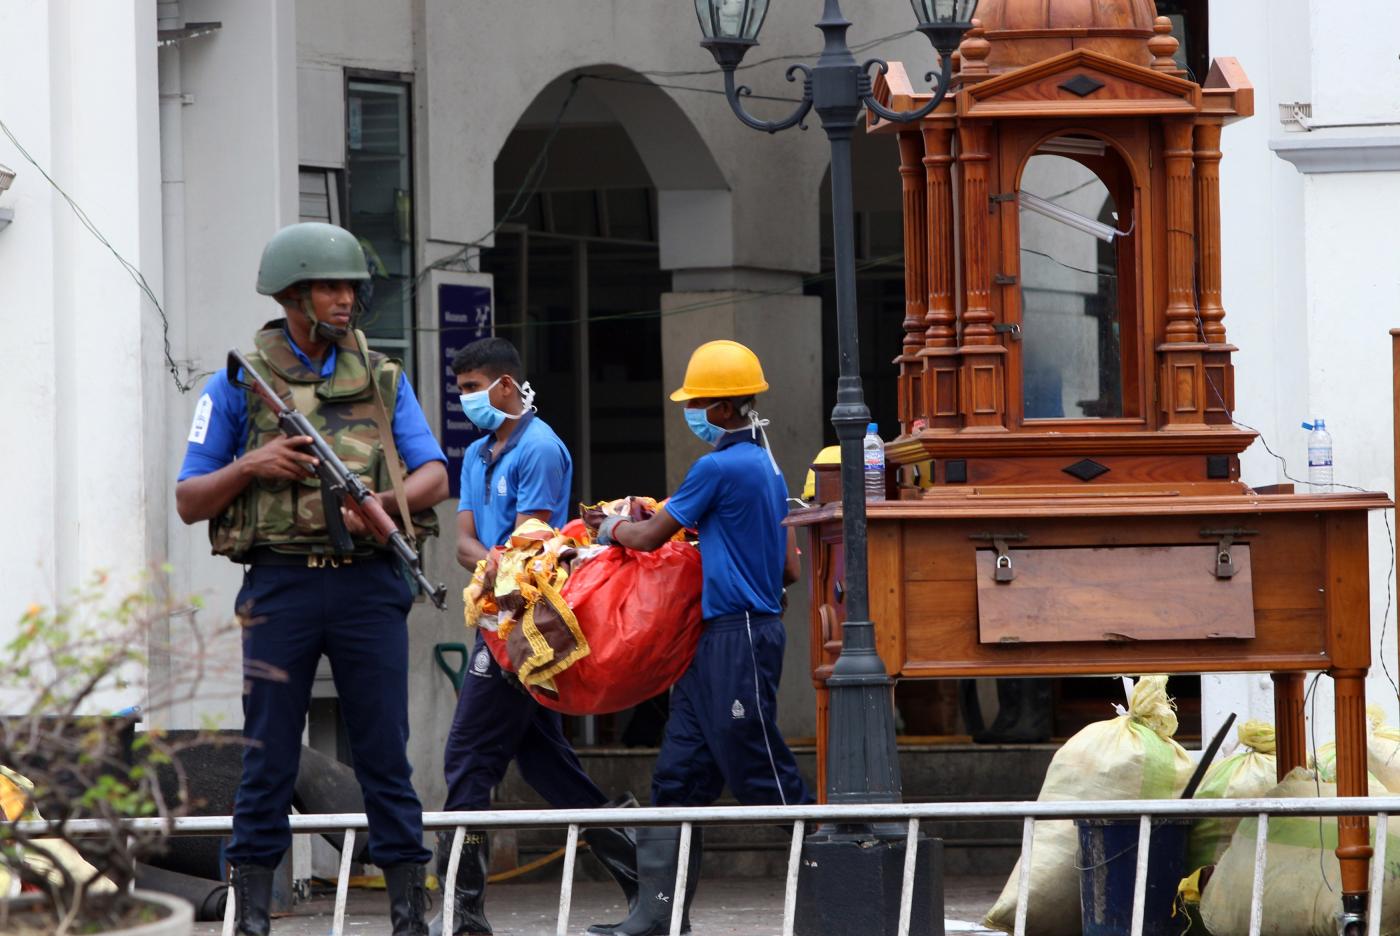 COLOMBO, April 27, 2019 (Xinhua) -- Workers clear away debris and shattered glass amid tight security outside St. Anthony's Church, one of the targets in a series of bomb blasts targeting churches and luxury hotels on Sunday in Colombo, Sri Lanka, on April 27, 2019. (Xinhua/A. Hapuarachchi/IANS) by A.HAPUARACHCHI.